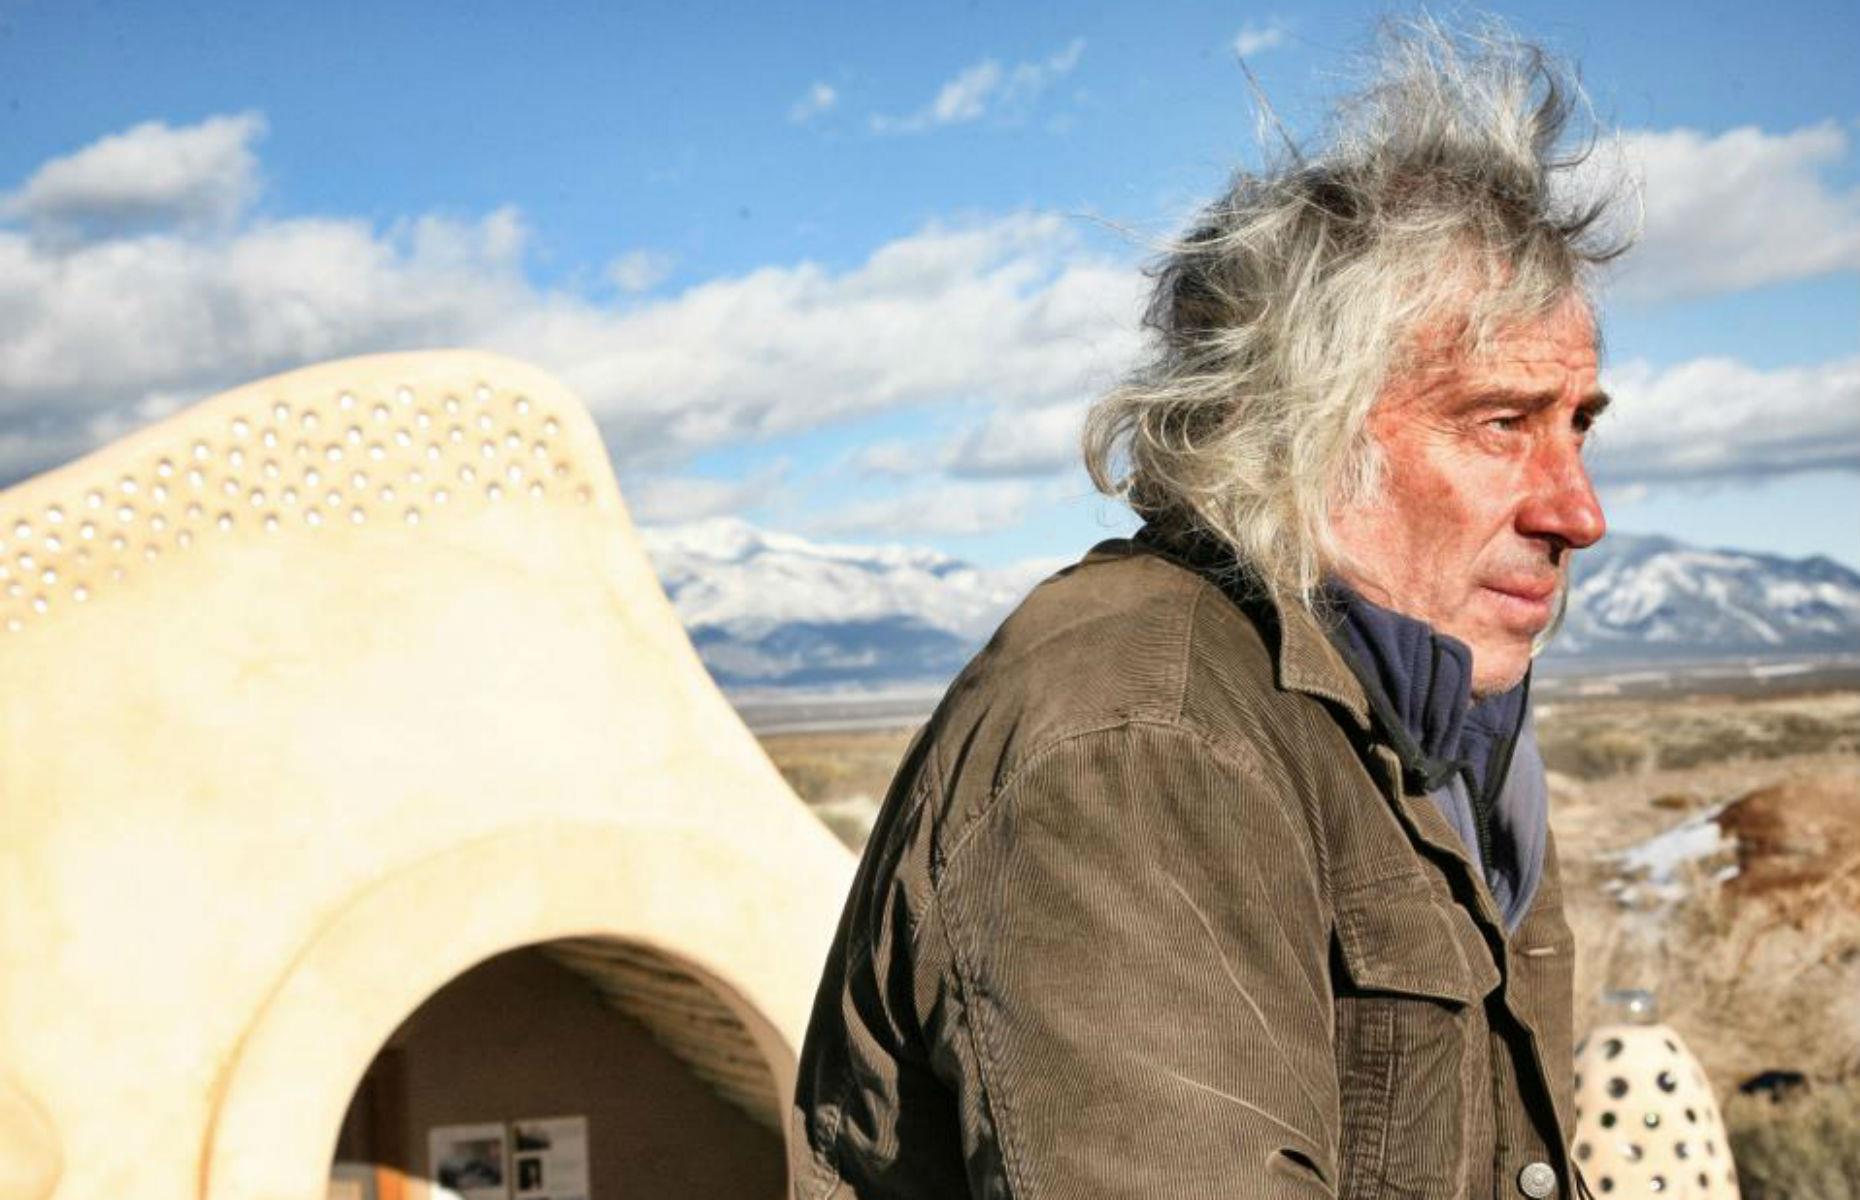 <p>American architect Michael Reynolds created the <a href="https://www.loveproperty.com/gallerylist/76795/incredible-earthships-offgrid-homes-youve-got-to-see">first Earthship</a> in the 1970s, after hearing stories about mounting landfill sites and the lack of affordable housing. He set up <a href="https://www.earthshipglobal.com/">Earthship Biotecture</a>, which is now the world's pioneering construction and design company for homes of this kind. Built from eco building materials, such as cans, tires, bottles, and mud, Earthships are totally self-sufficient—producing their own electricity, heating, and food, while featuring sustainable rainwater harvesting and sewage systems, too. </p>